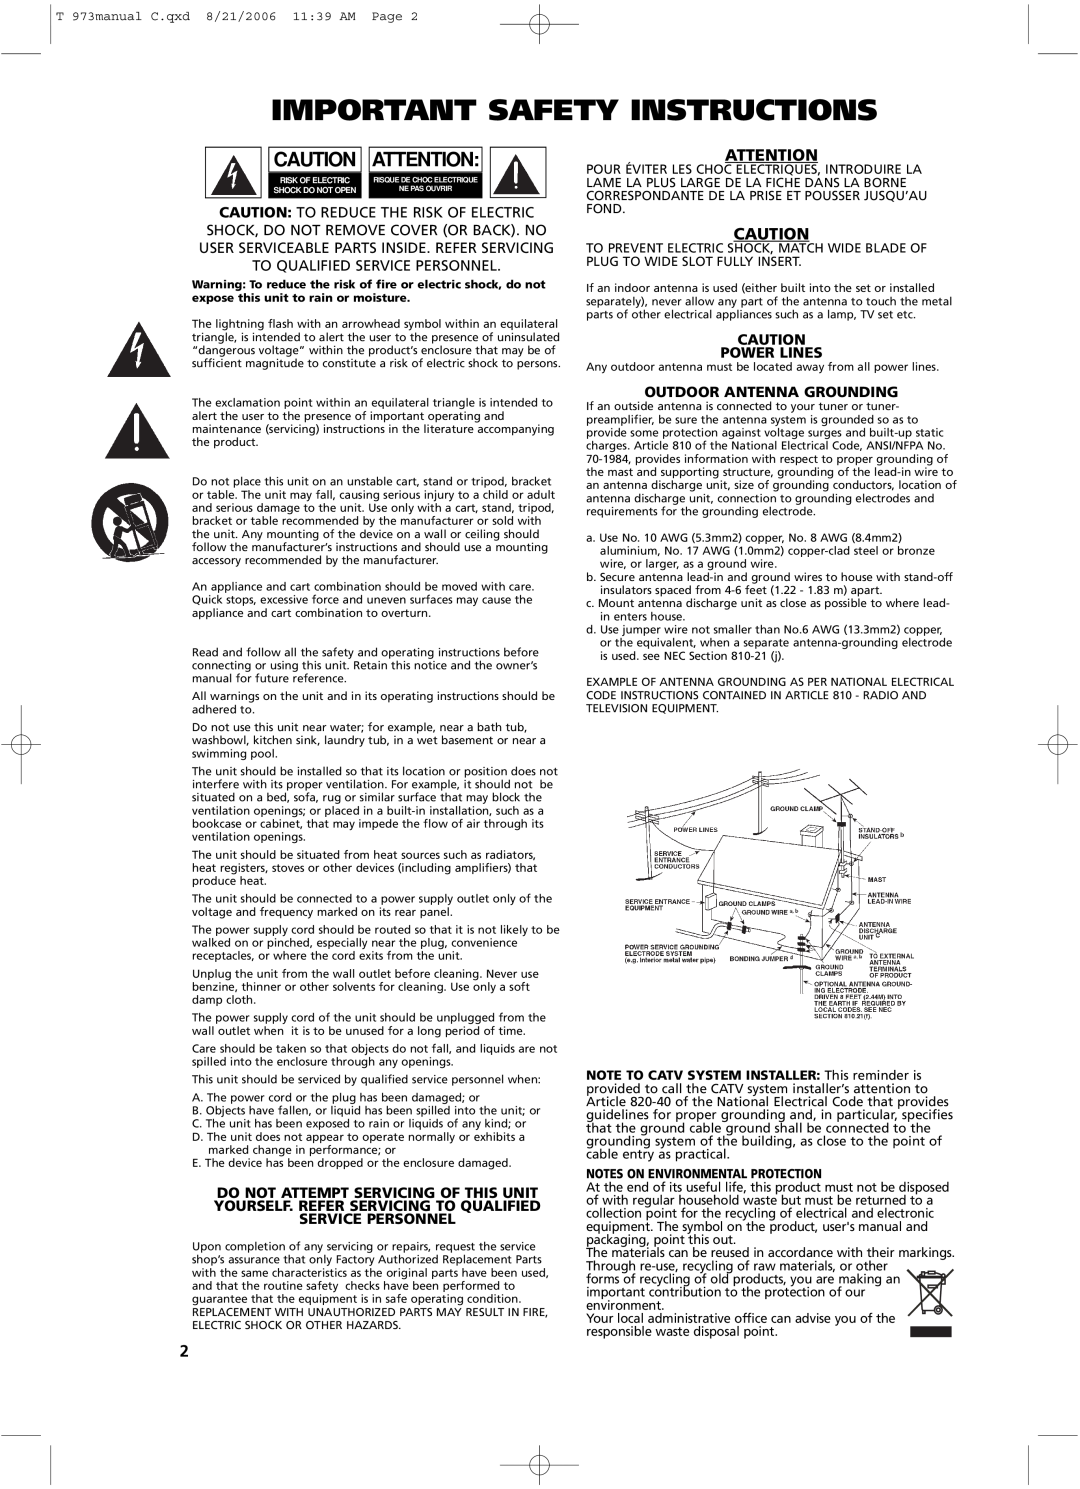 NAD T 973 Important Safety Instructions, Notes On Environmental Protection, Power Lines, Outdoor Antenna Grounding 